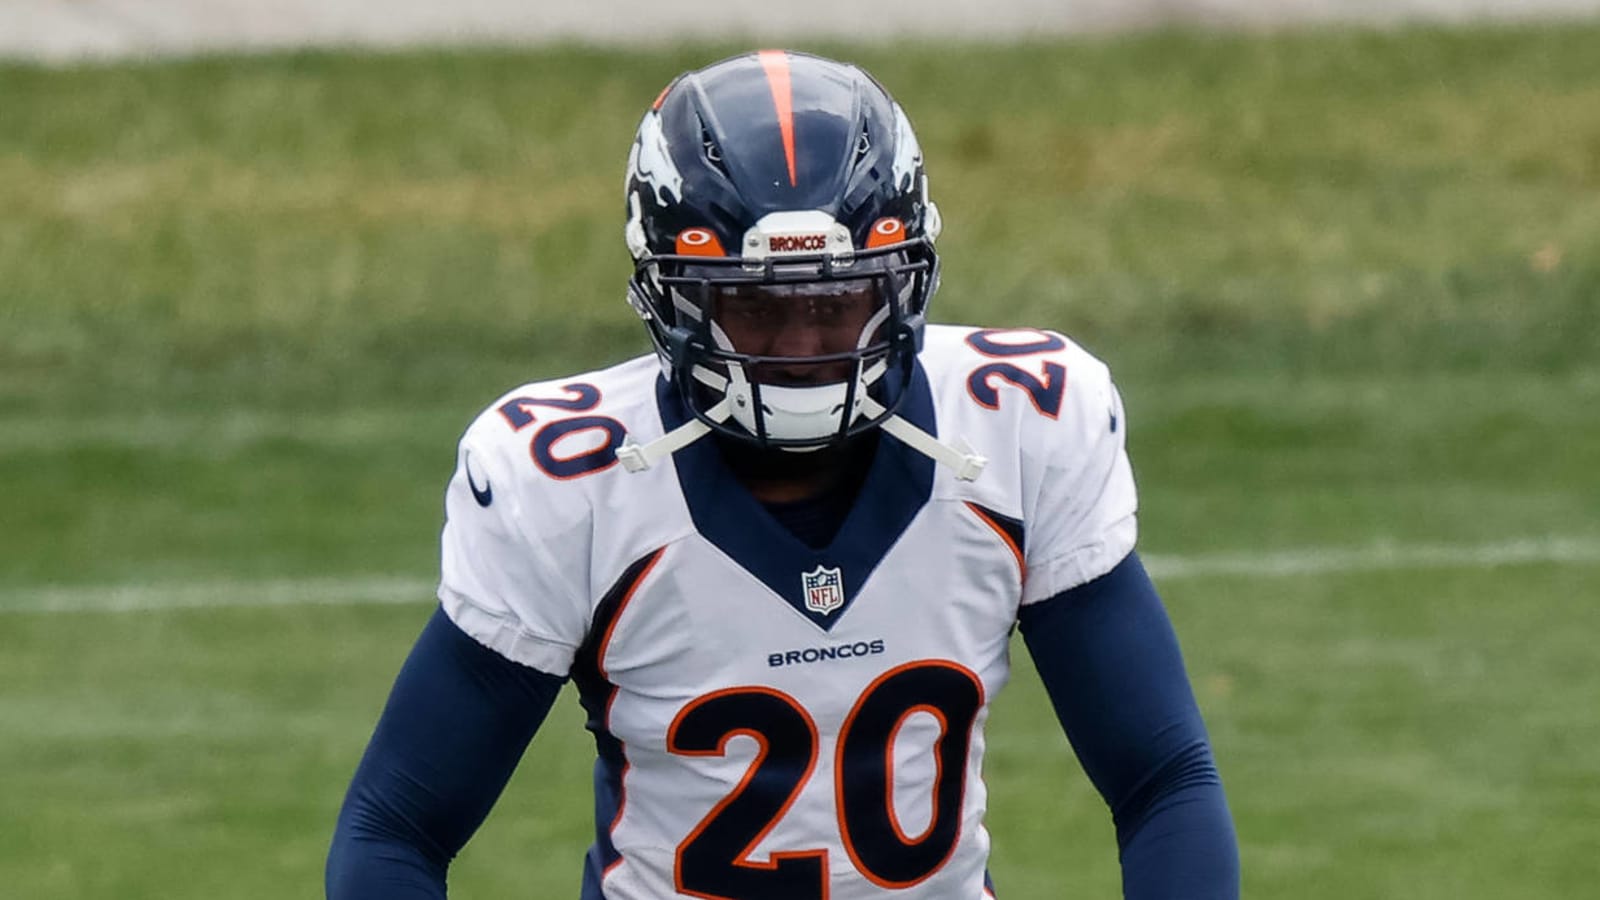 Duke Dawson suffers torn ACL in Broncos' win over Panthers